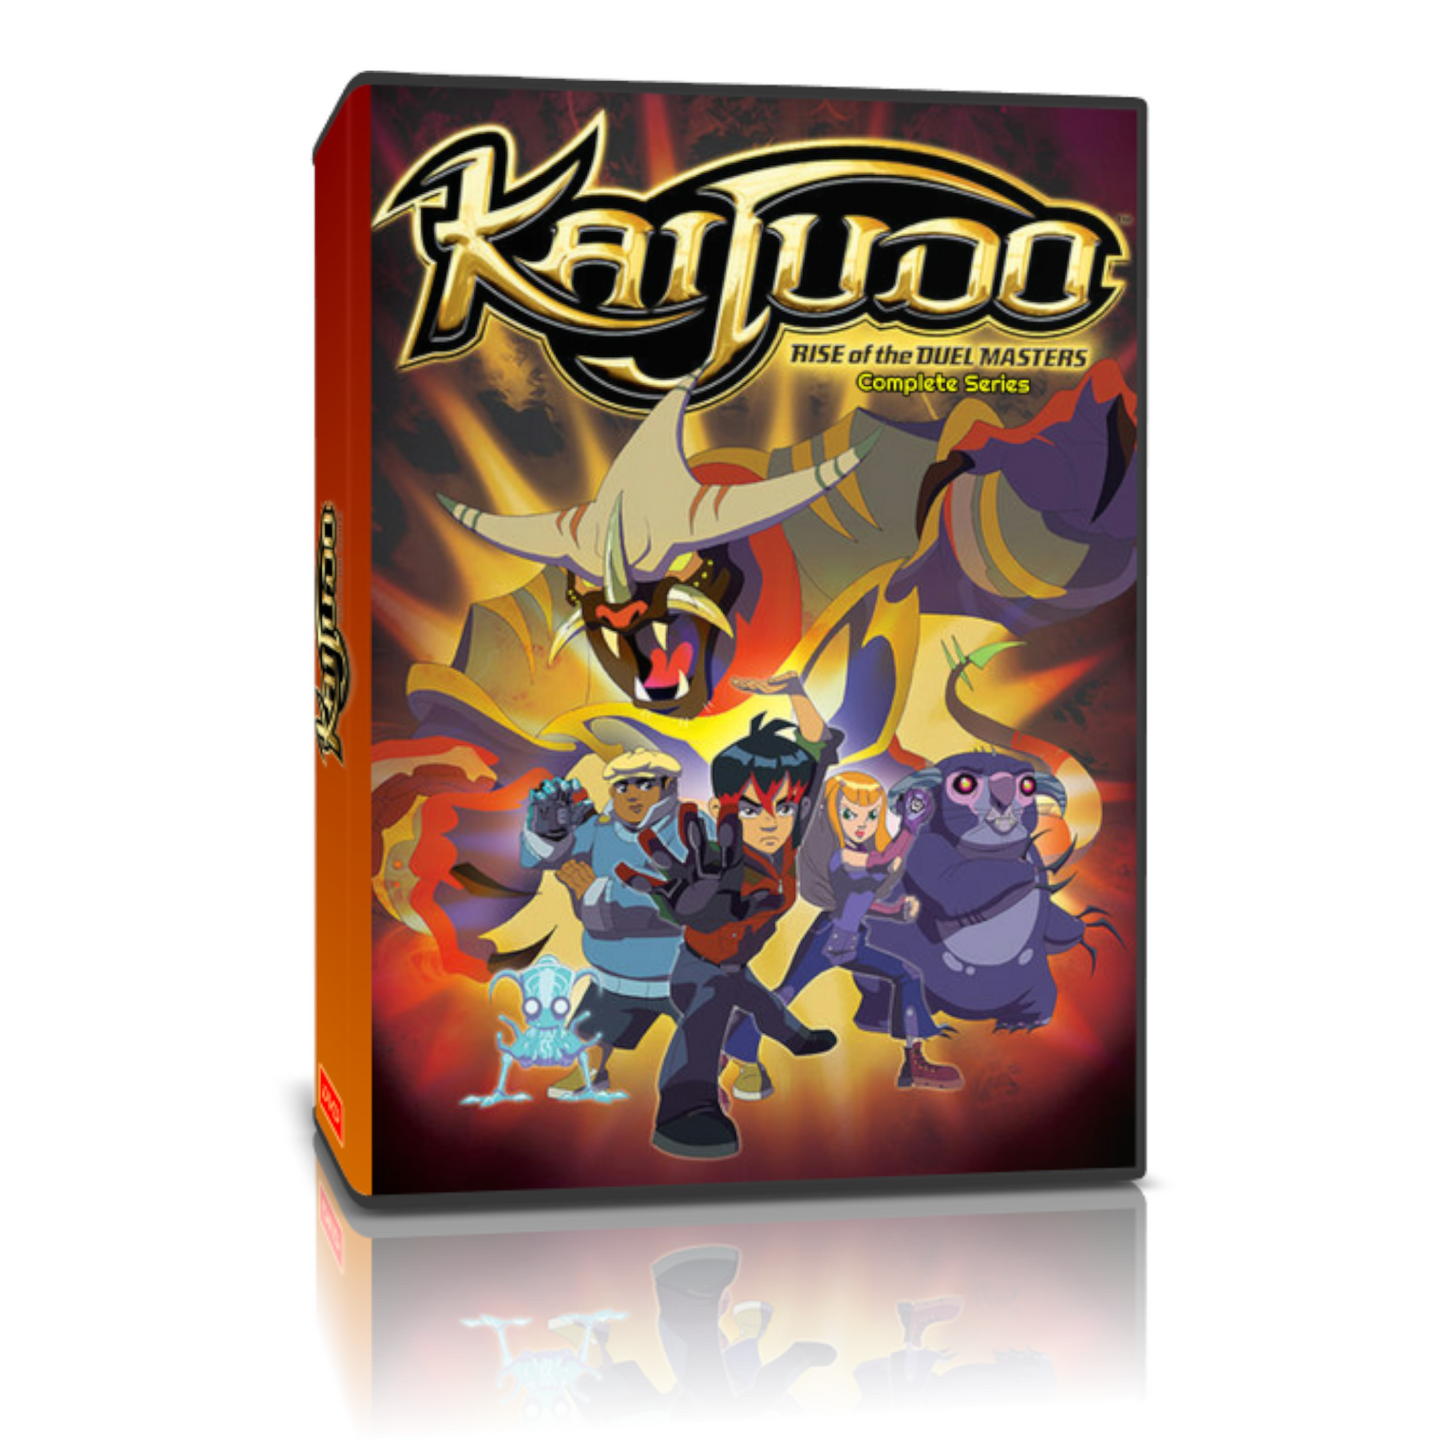 Kaijudo: Rise & Clash of the Duel Masters Complete Series DVD - RetroAnimation 